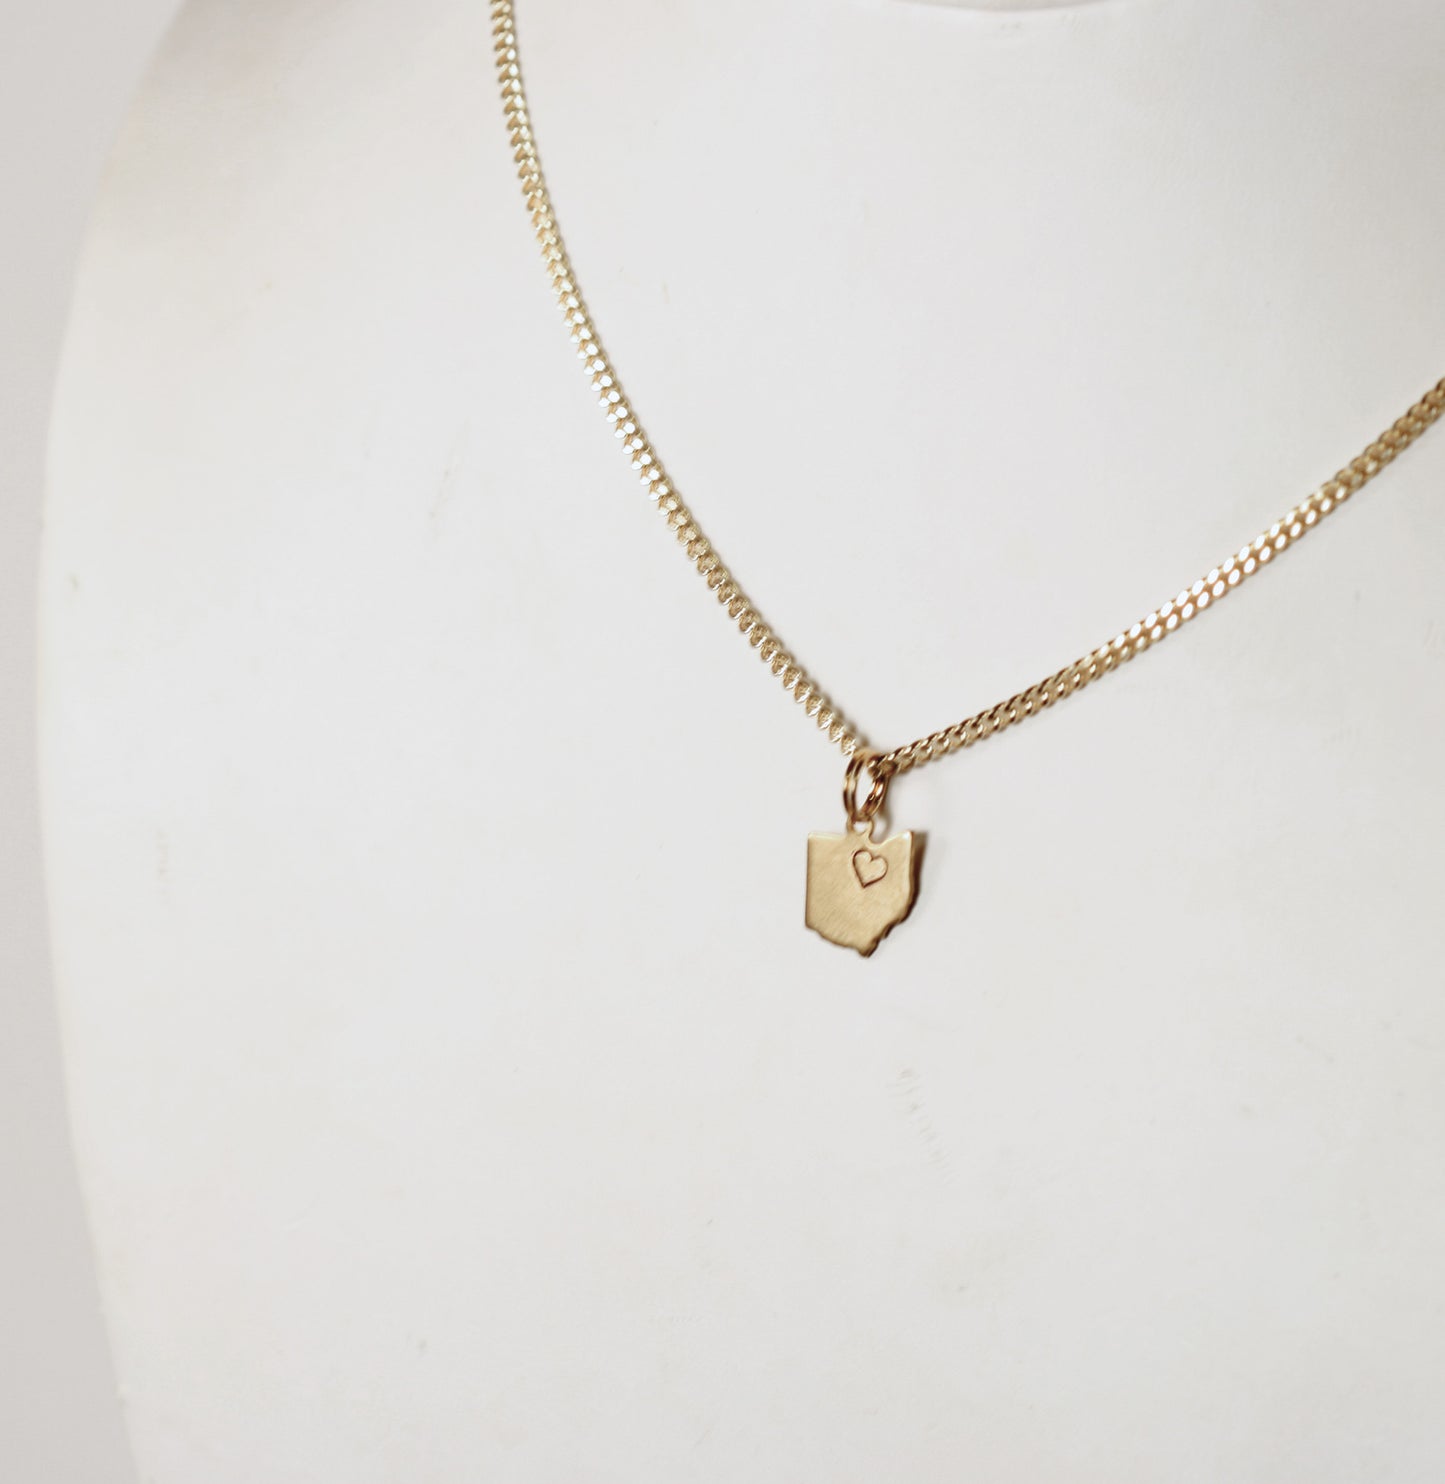 Small Gold Ohio Charm Necklace